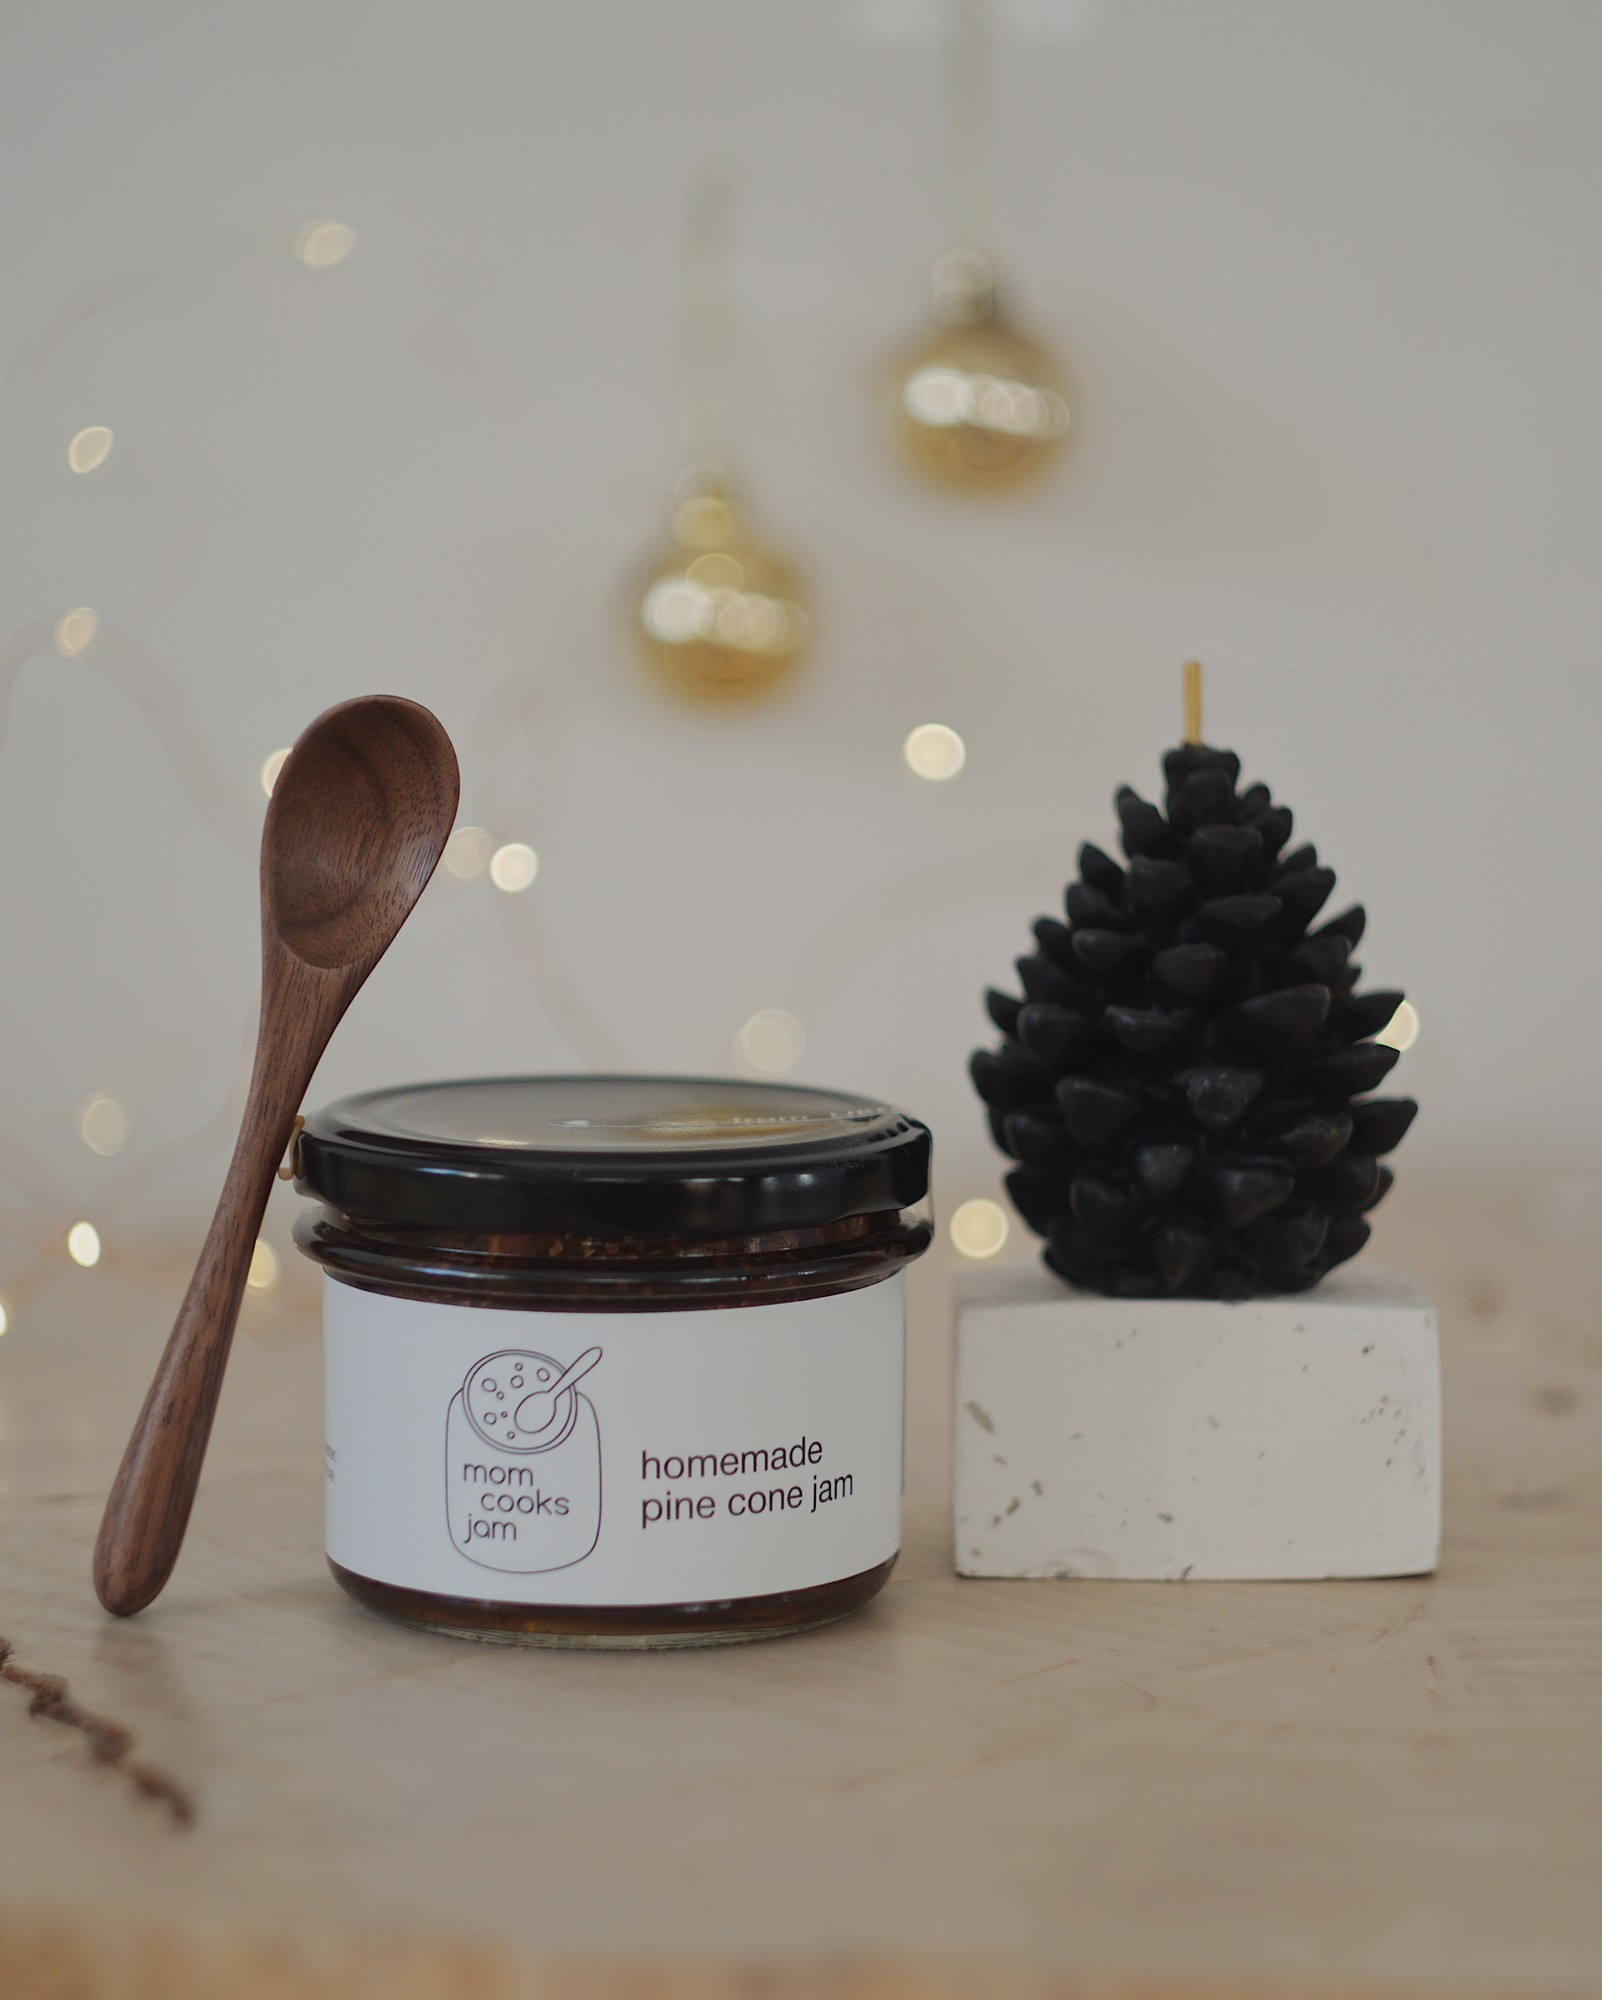 Christmas gift set with a pine cone jam, a wax candle and wooden spoon